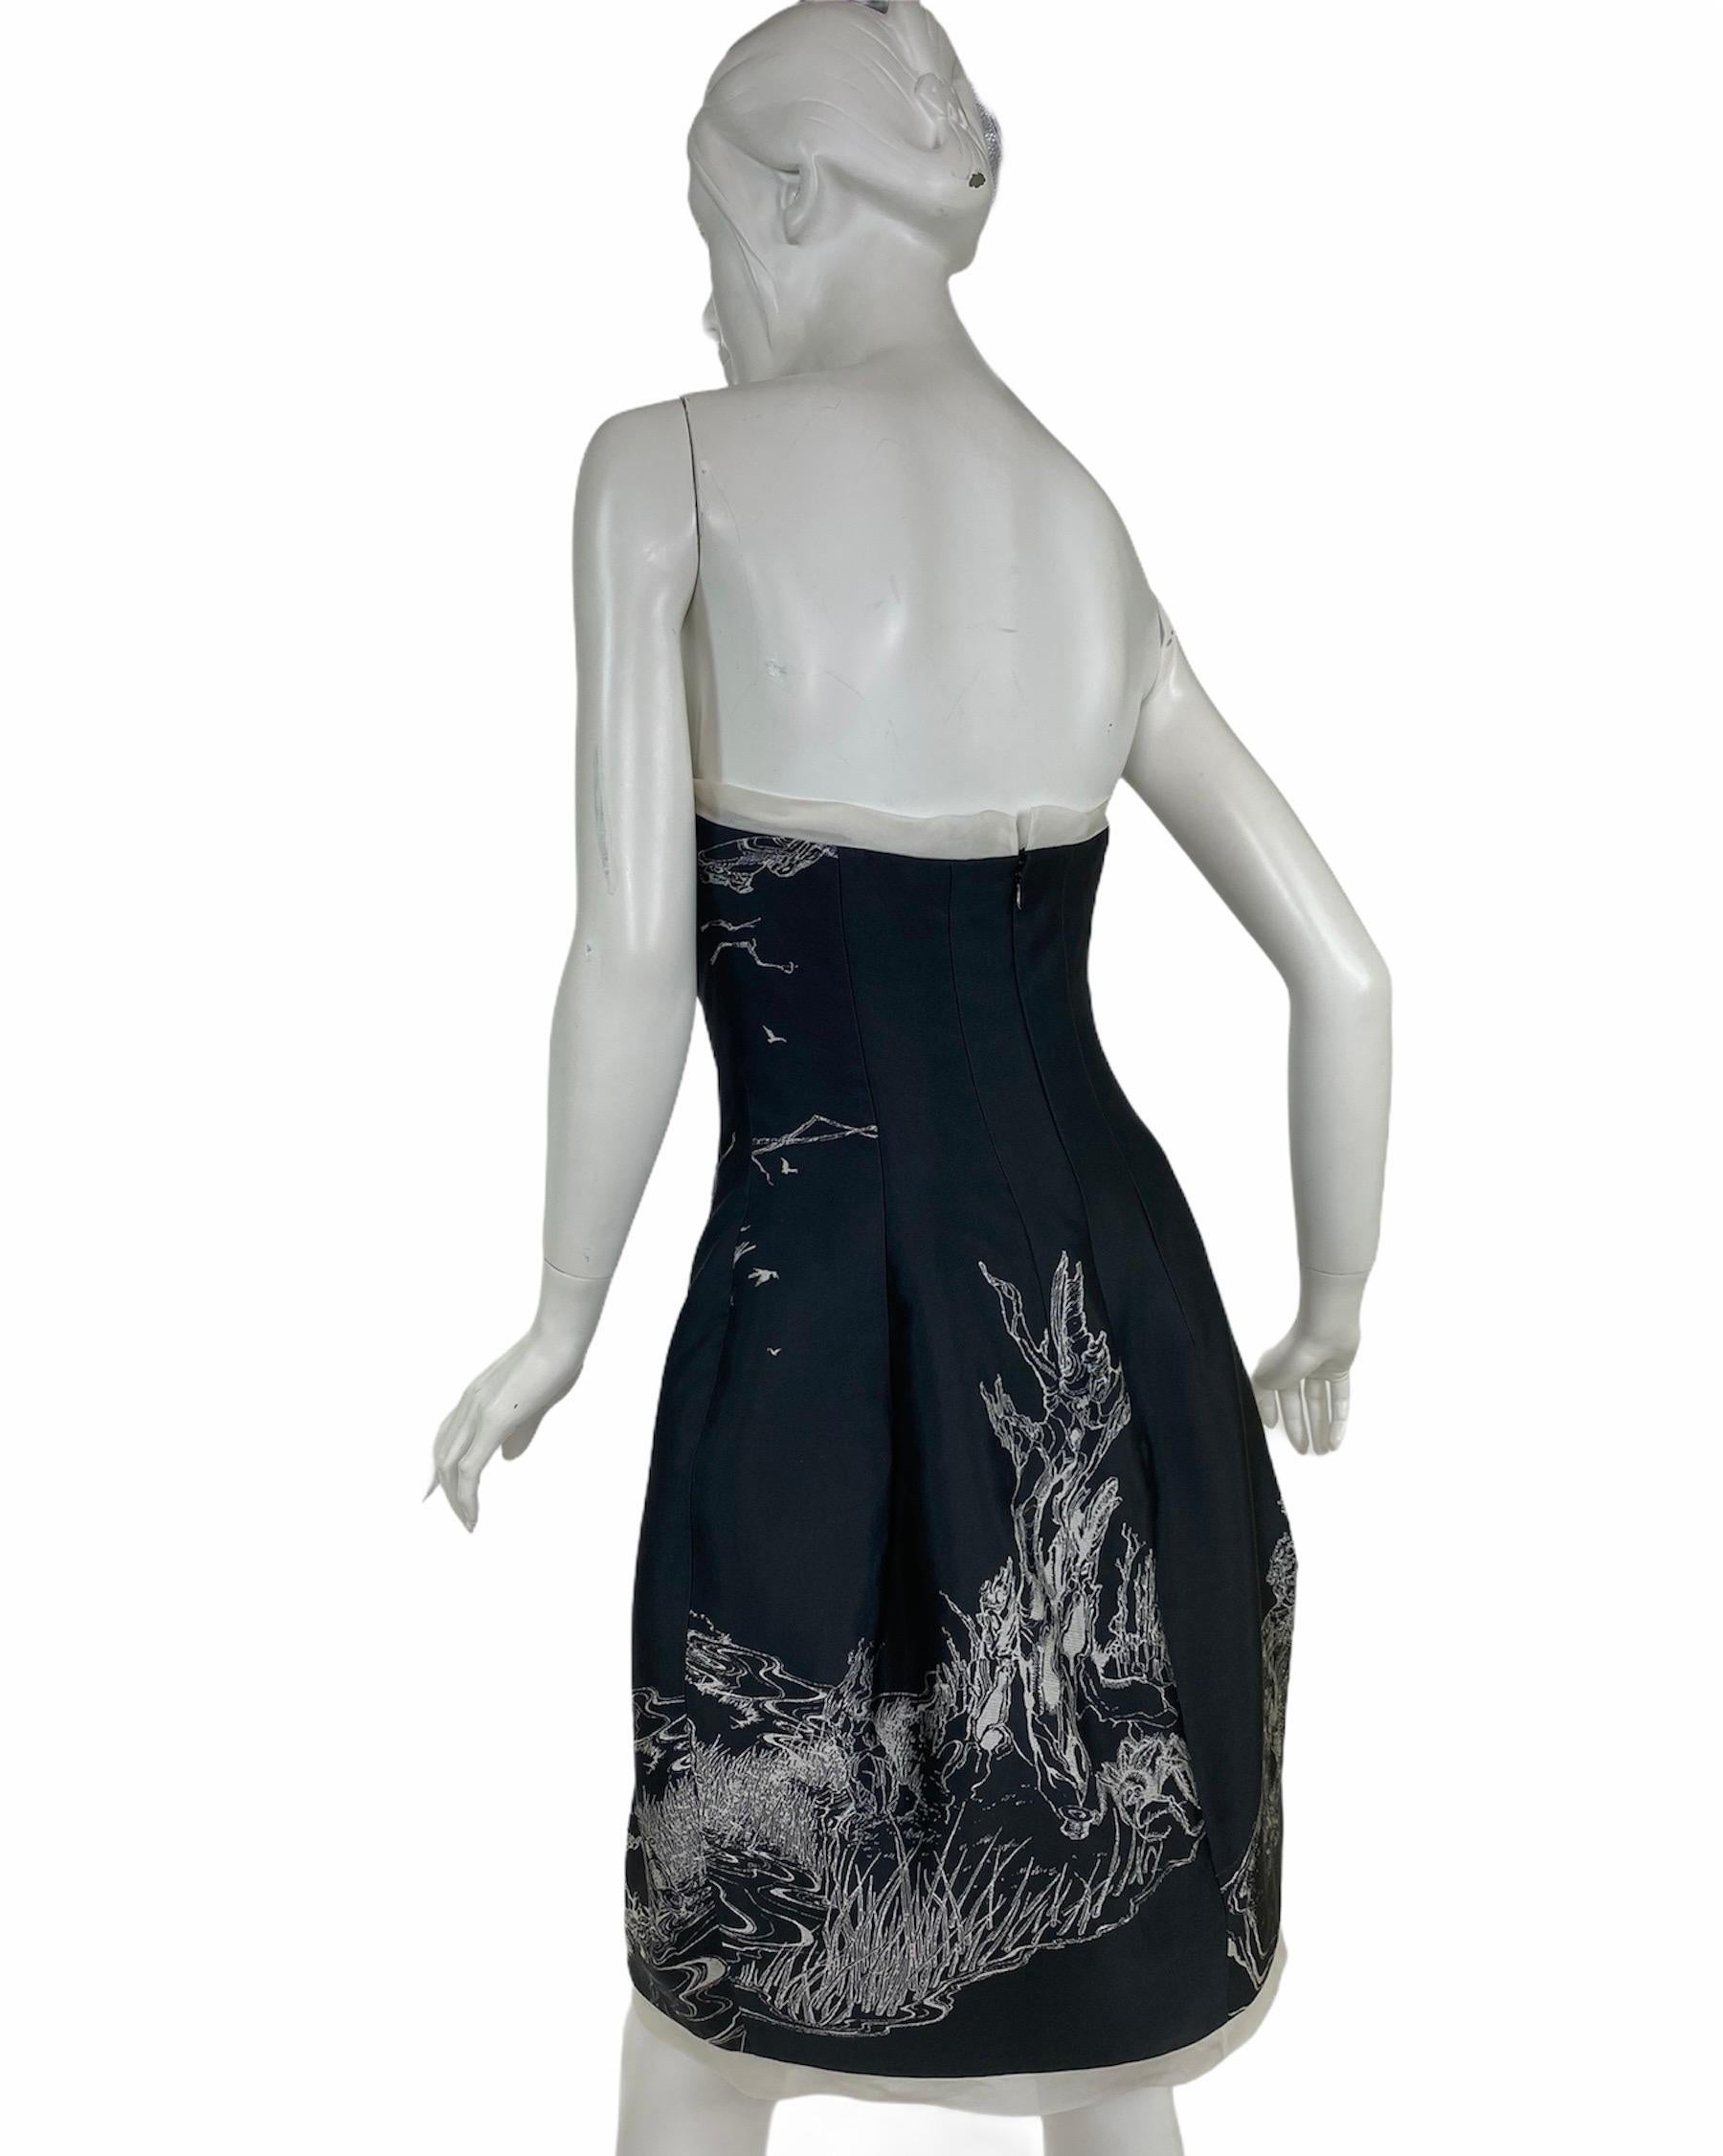 Alexander McQueen 2008 “The Girl Who Lived in the Tree” Dress  In Excellent Condition For Sale In Montgomery, TX